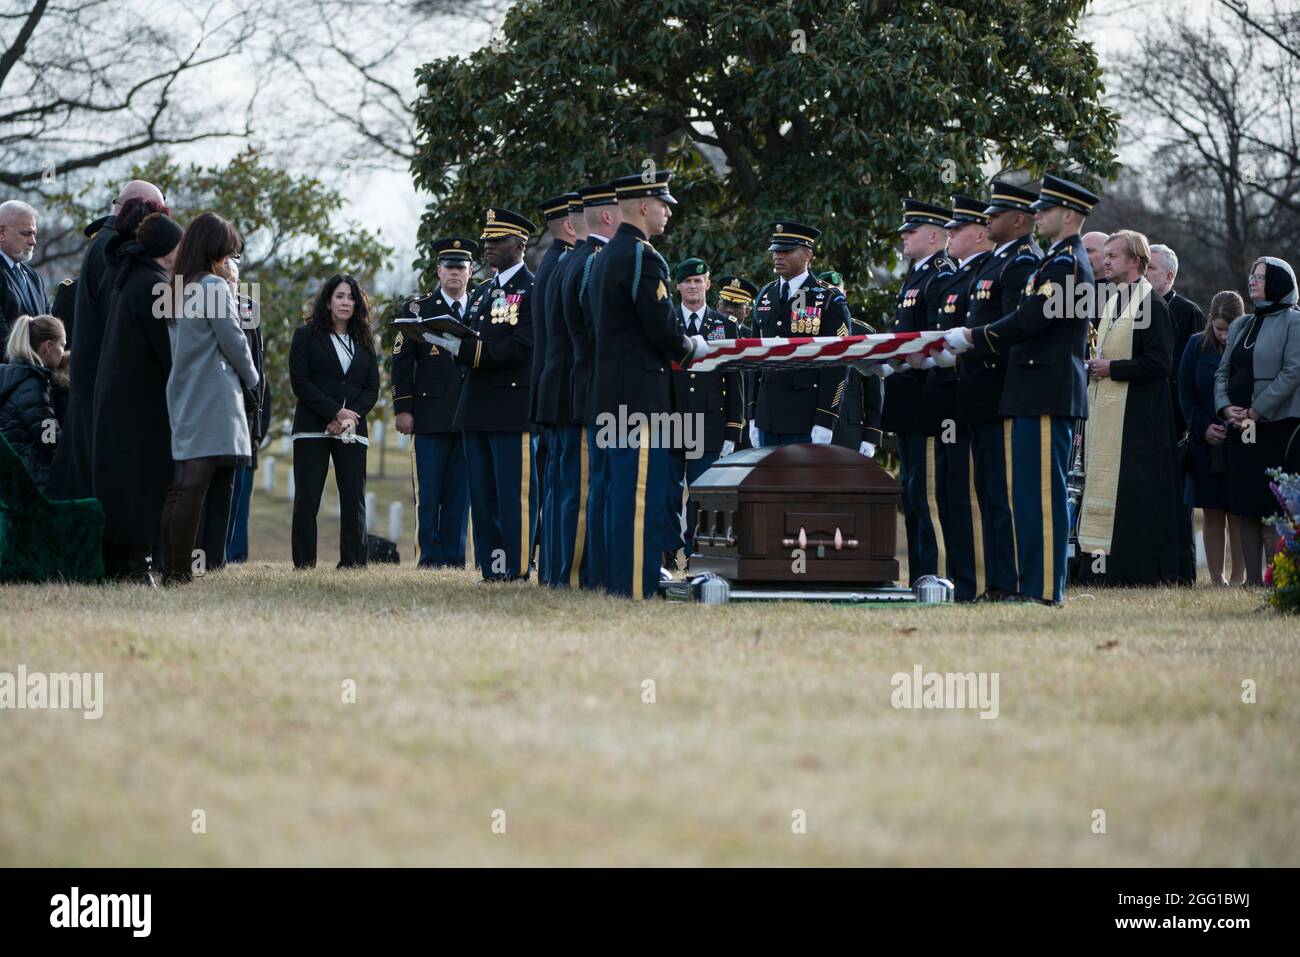 U.S. Army Chaplain Willie Mashack (Maj.) gives remarks during the service of U.S. Army Sgt. 1st Class Mihail Golin, in Section 60 of Arlington National Cemetery,  Arlington, Virginia, Jan. 22, 2018. Golin, an 18B Special Forces Weapons Sergeant assigned to 10th Special Forces Group (Airborne) died Jan. 1, 2018, as a result of wounds sustained while engaged in combat operations in Nangarhar Province, Afghanistan.  Golin deployed to Afghanistan in September 2017 with the 2nd Battalion, 10th Special Forces Group, in support of Operation Freedom’s Sentinel.  Golin enlisted Jan. 5, 2005 and this wa Stock Photo